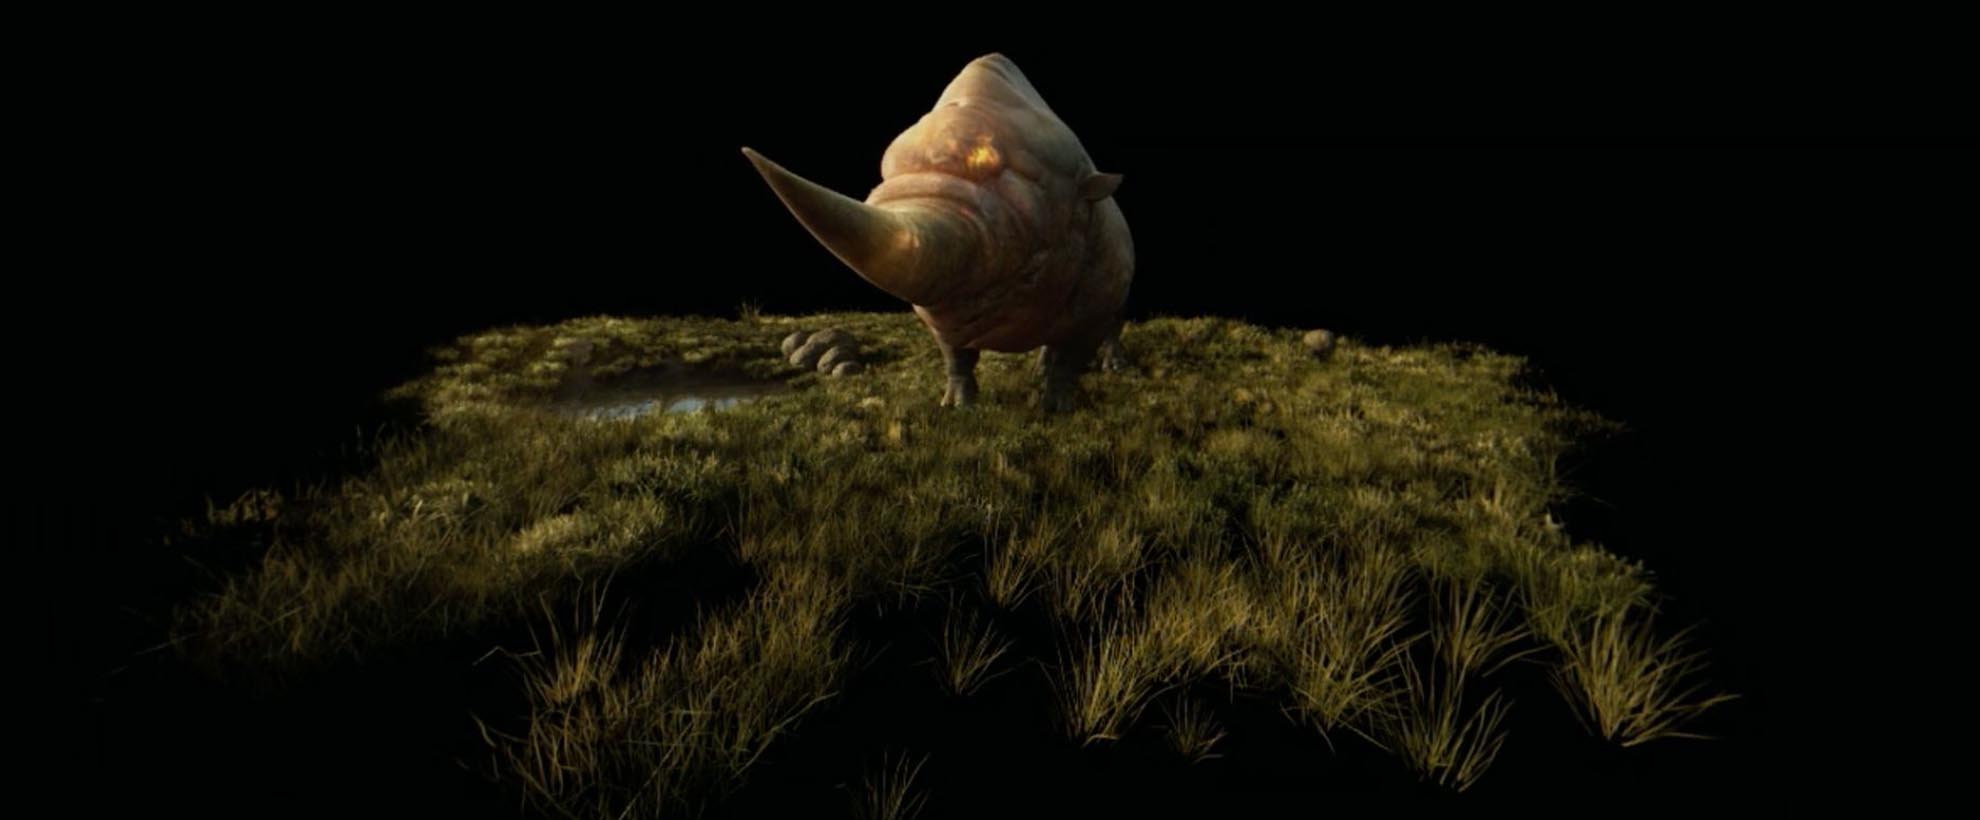 A fictional animal that look rhino-like stands in a grassy plain